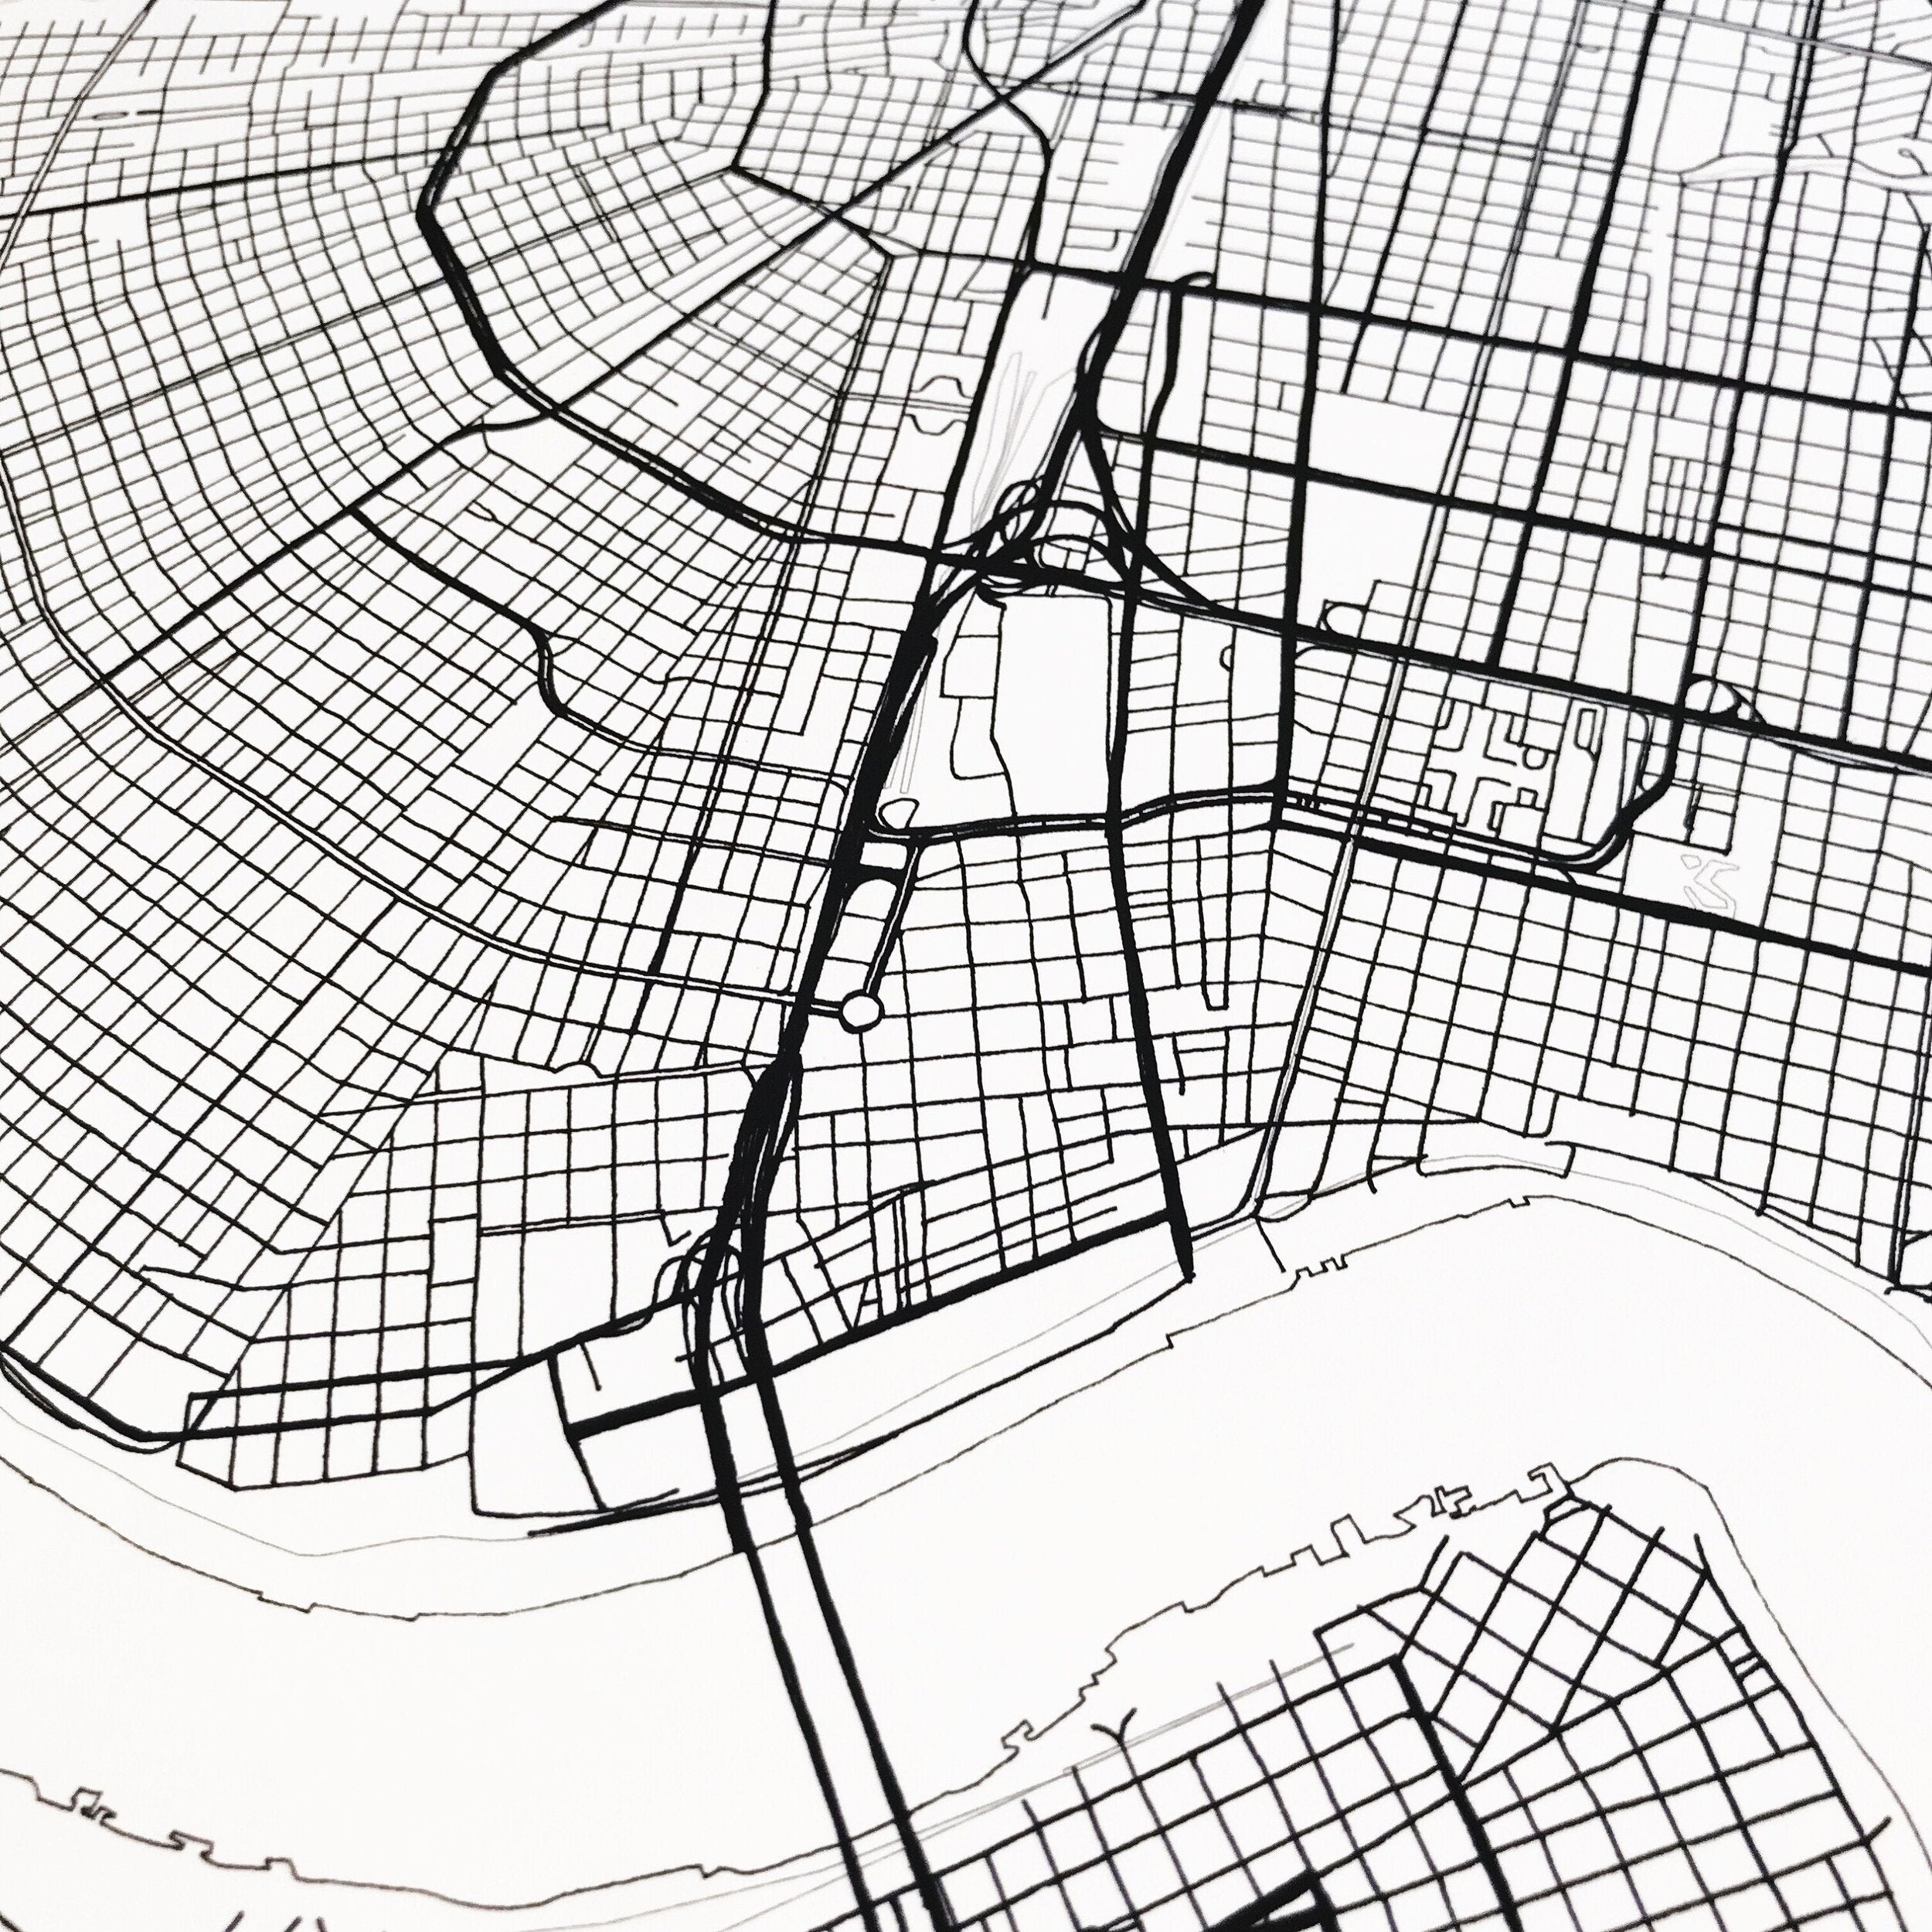 NEW ORLEANS City Lines Map: PRINT